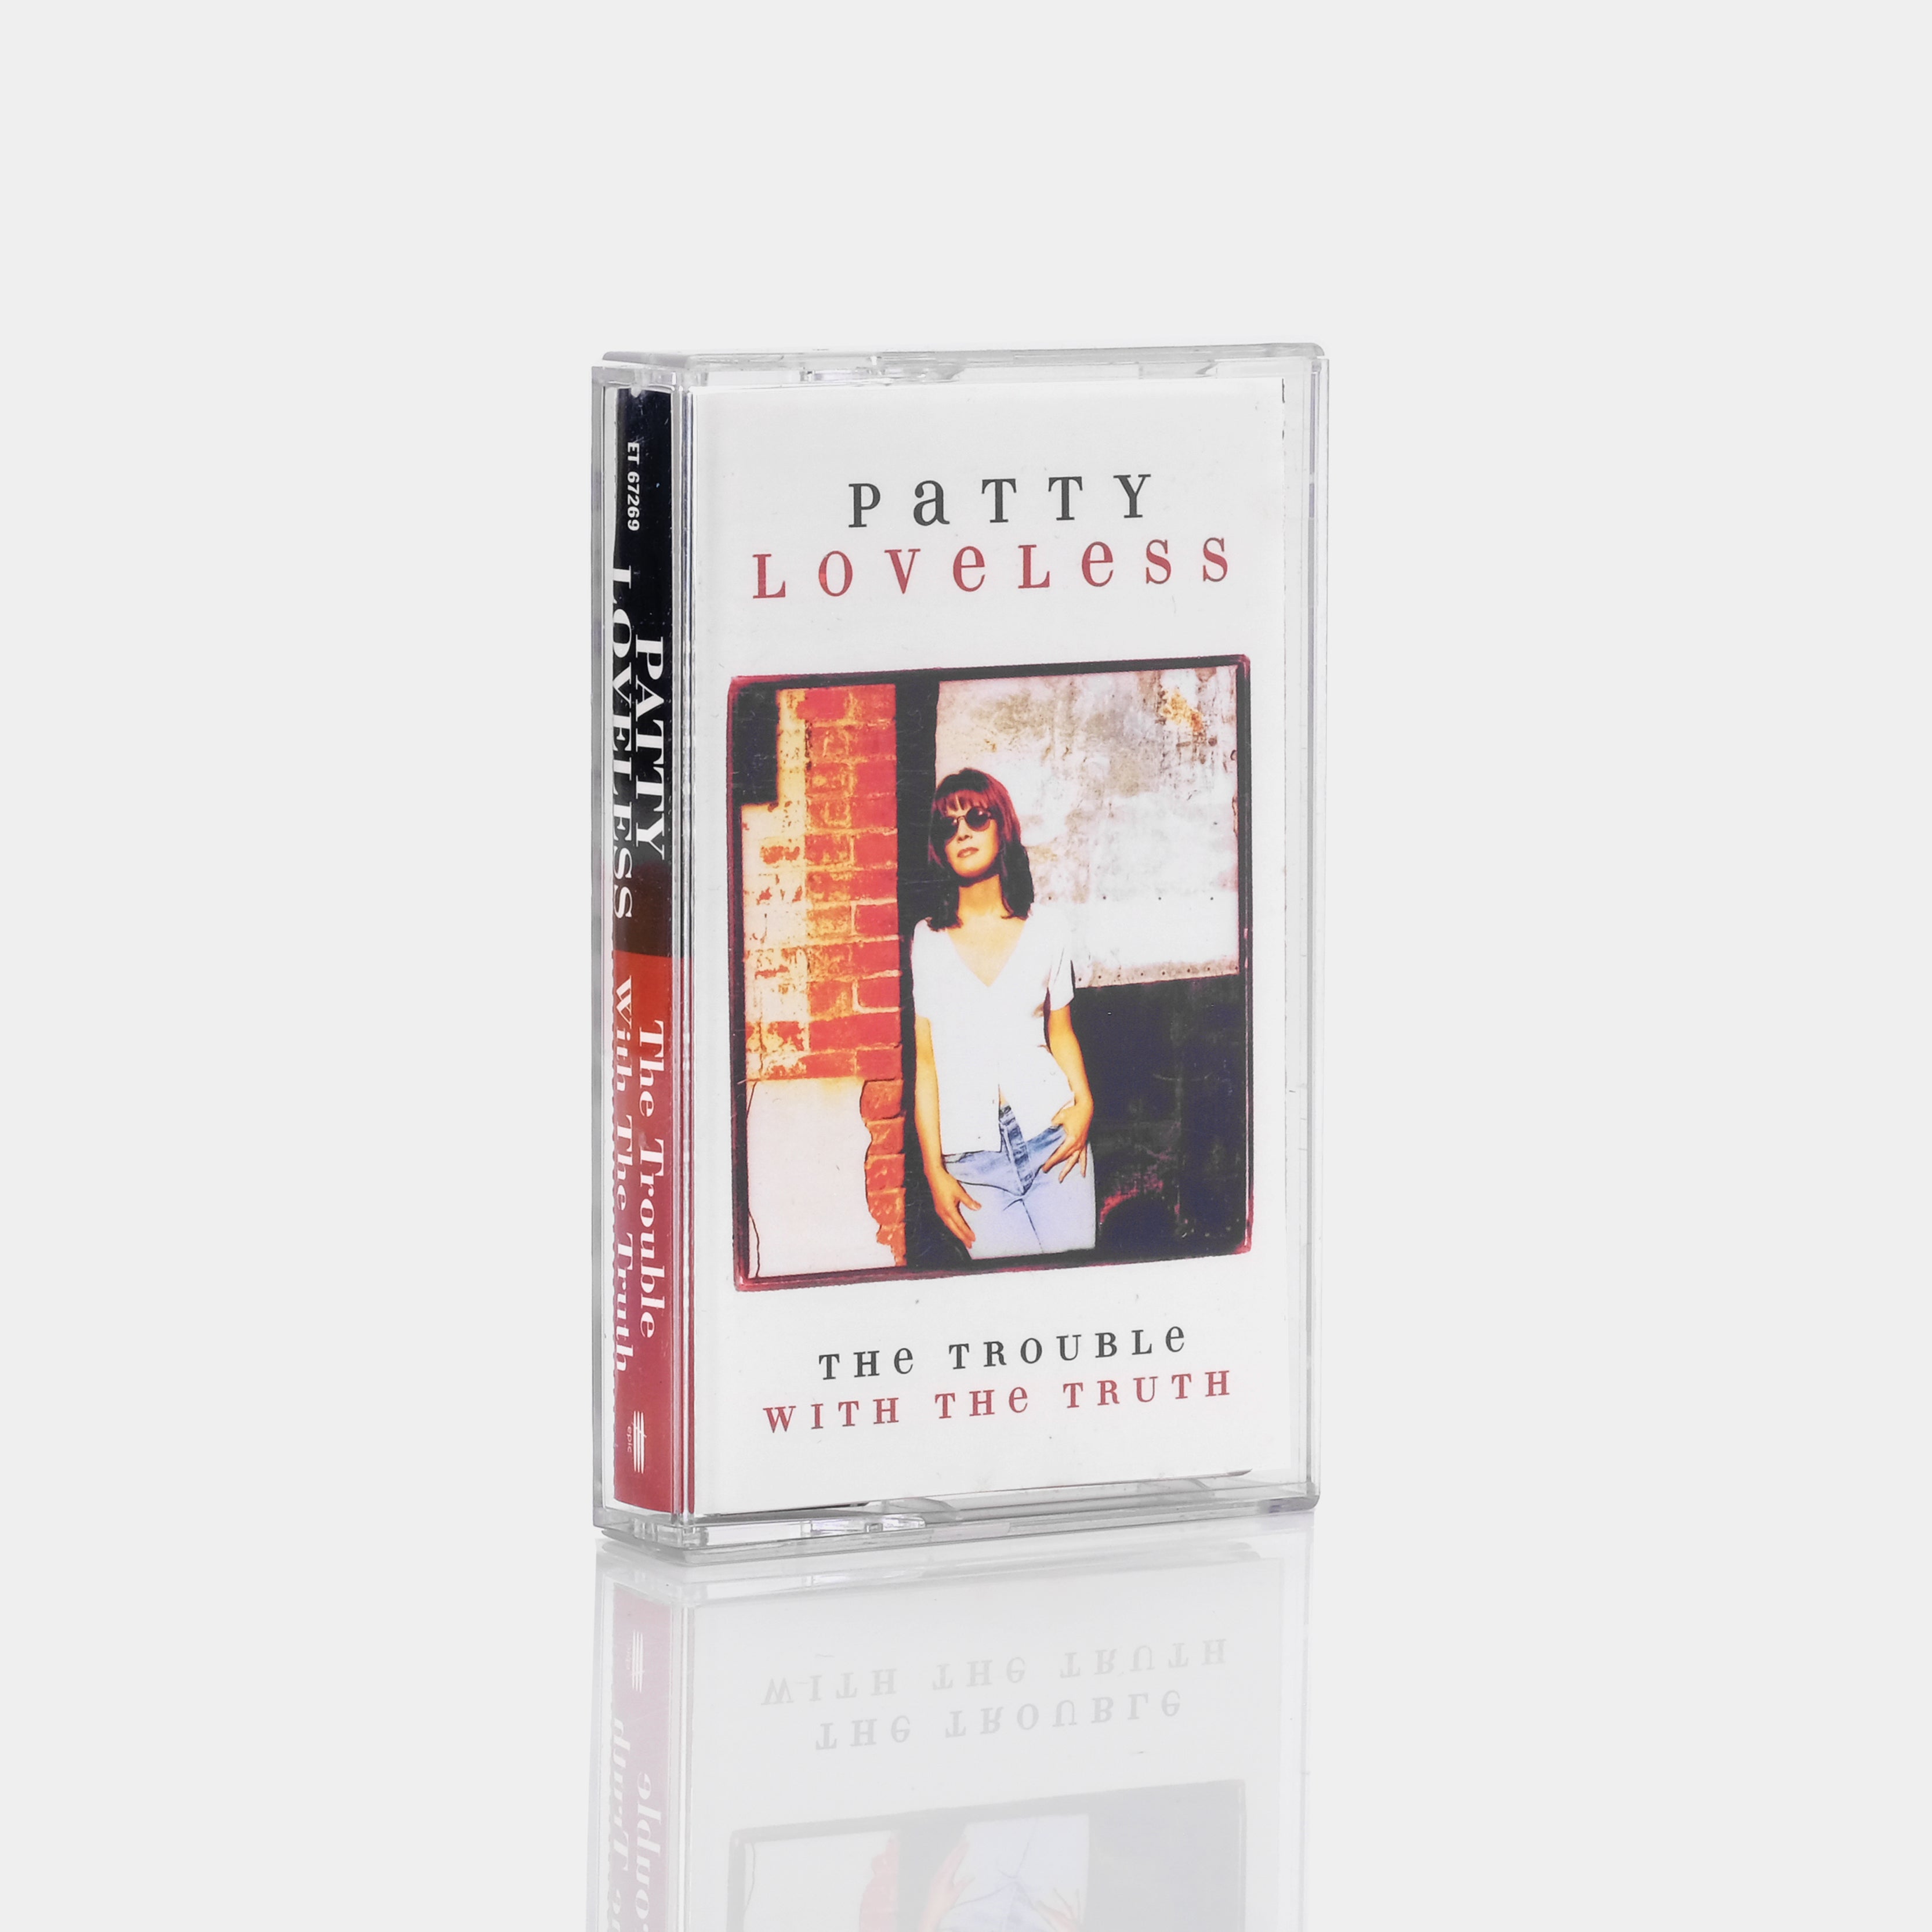 Patty Loveless - The Trouble With The Truth Cassette Tape